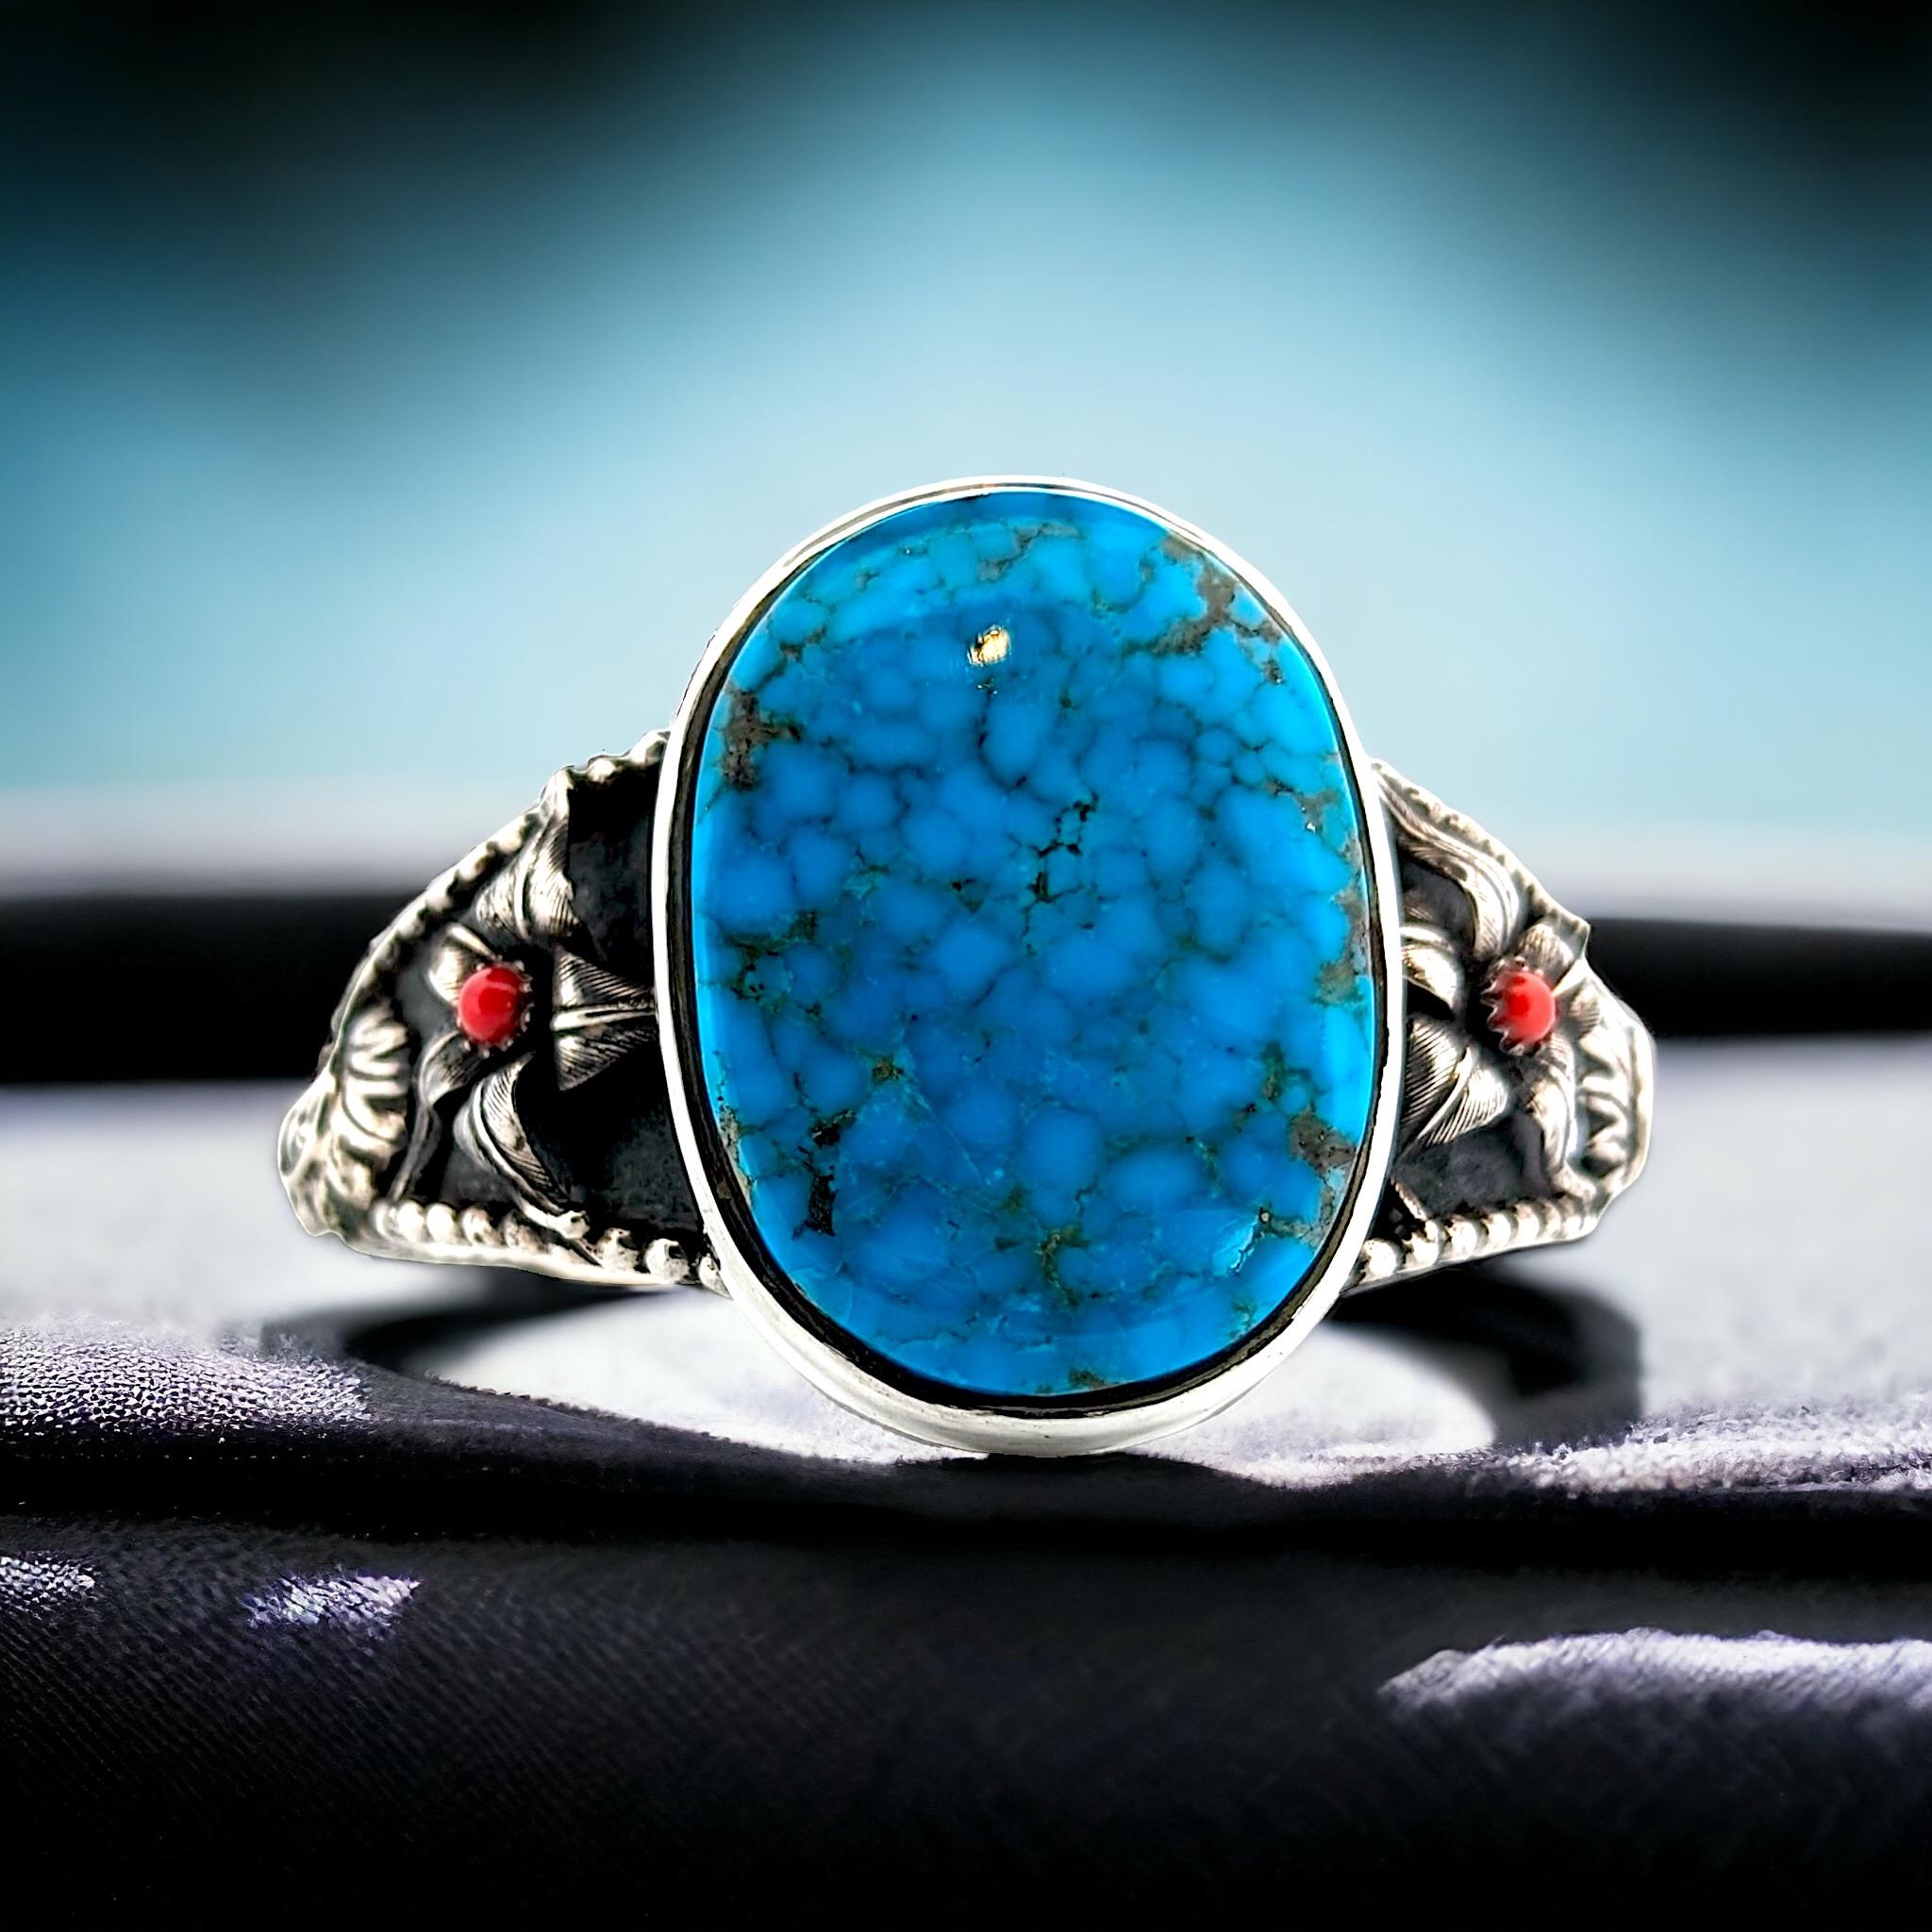 This gorgeous cuff bracelet combines the colorful spirit of the Southwest with classic elegance. The bracelet, which is made of polished sterling silver, provides a traditional base. The focal point is the eye-catching Kingman turquoise stone.